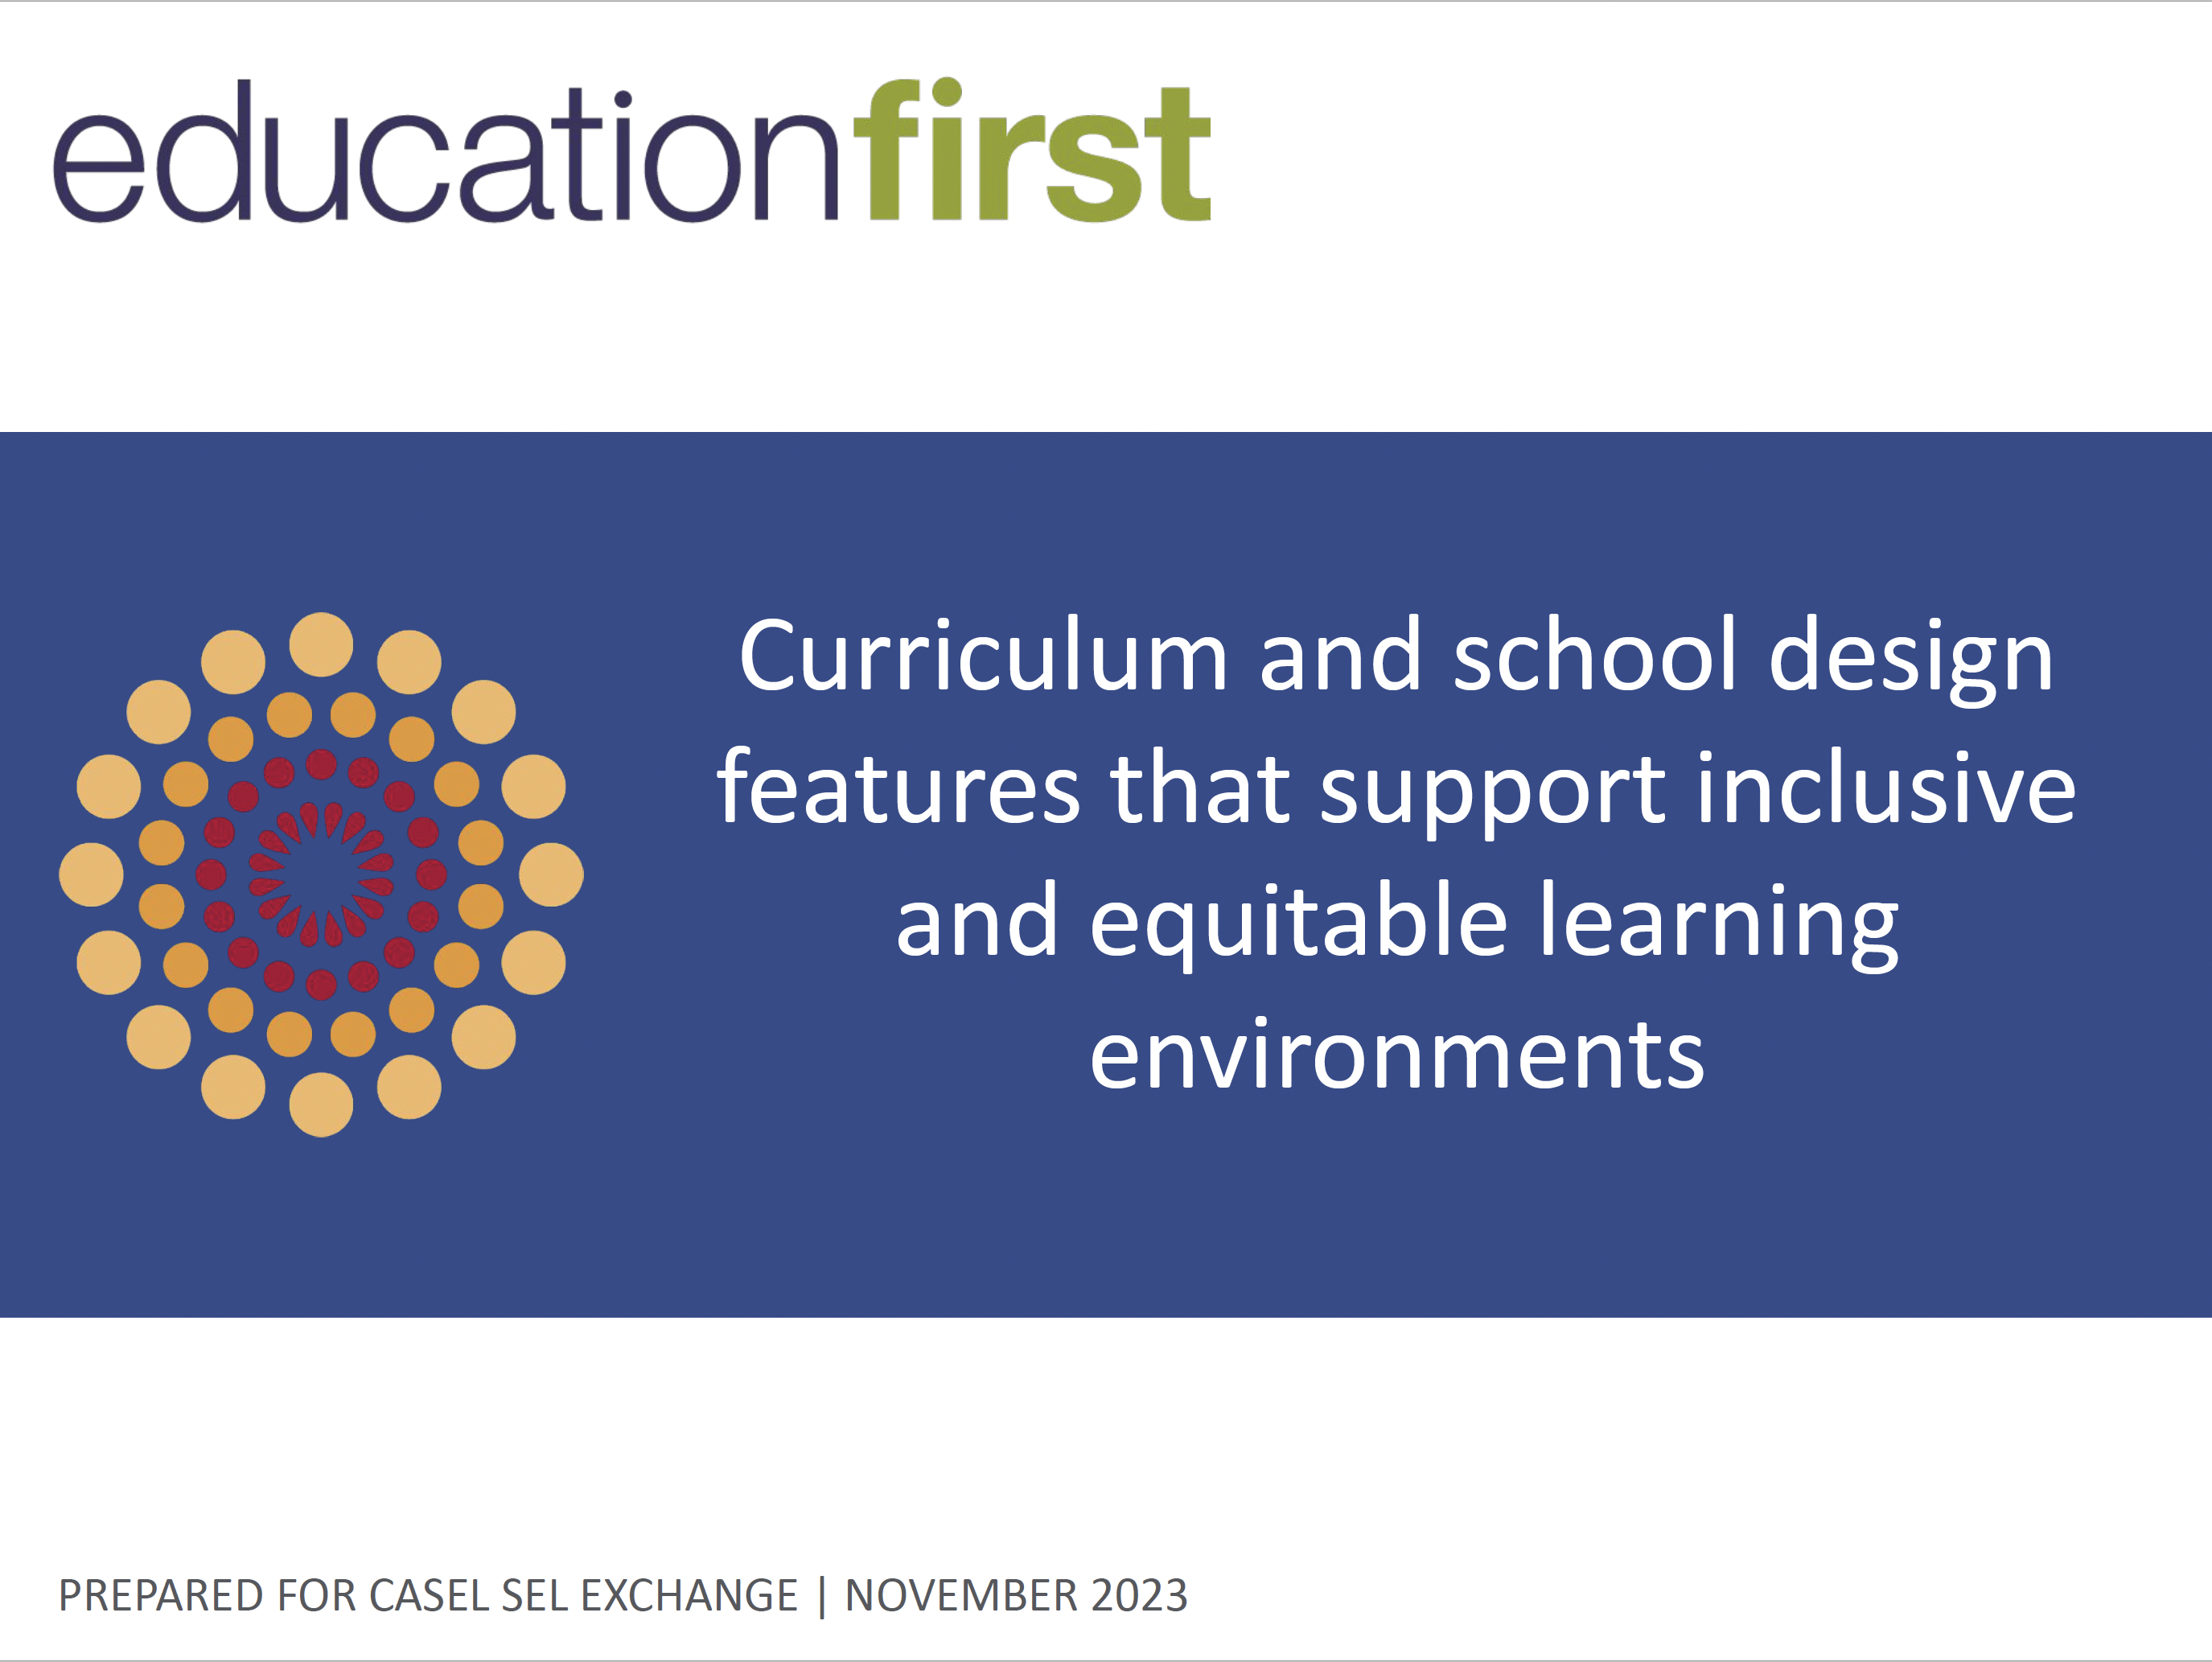 Curriculum and School Design Features That Support Inclusive and Equitable Learning Environemnts